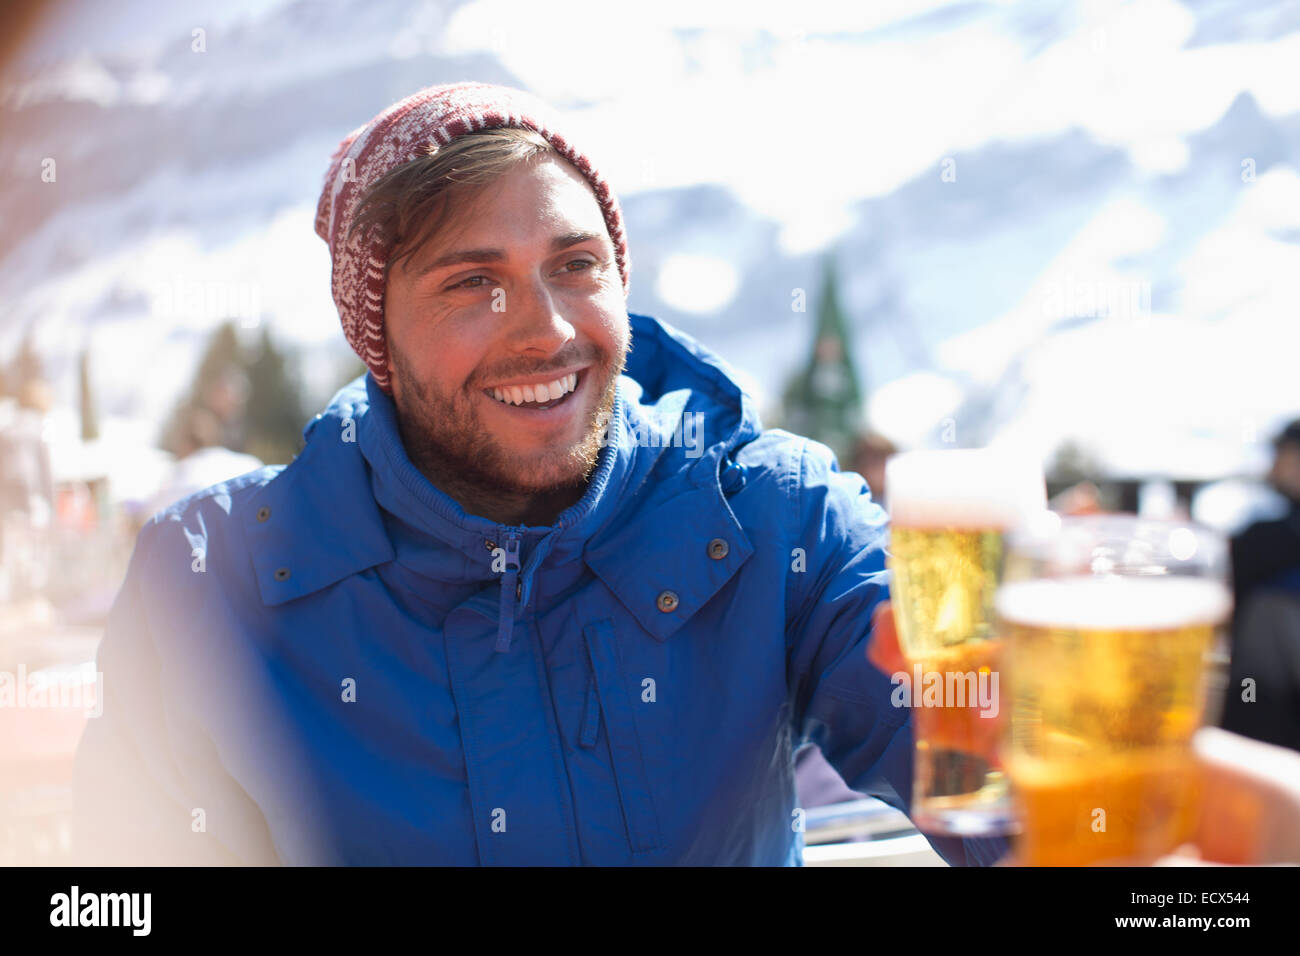 Smiling man in warm clothing drinking beer outdoors Stock Photo